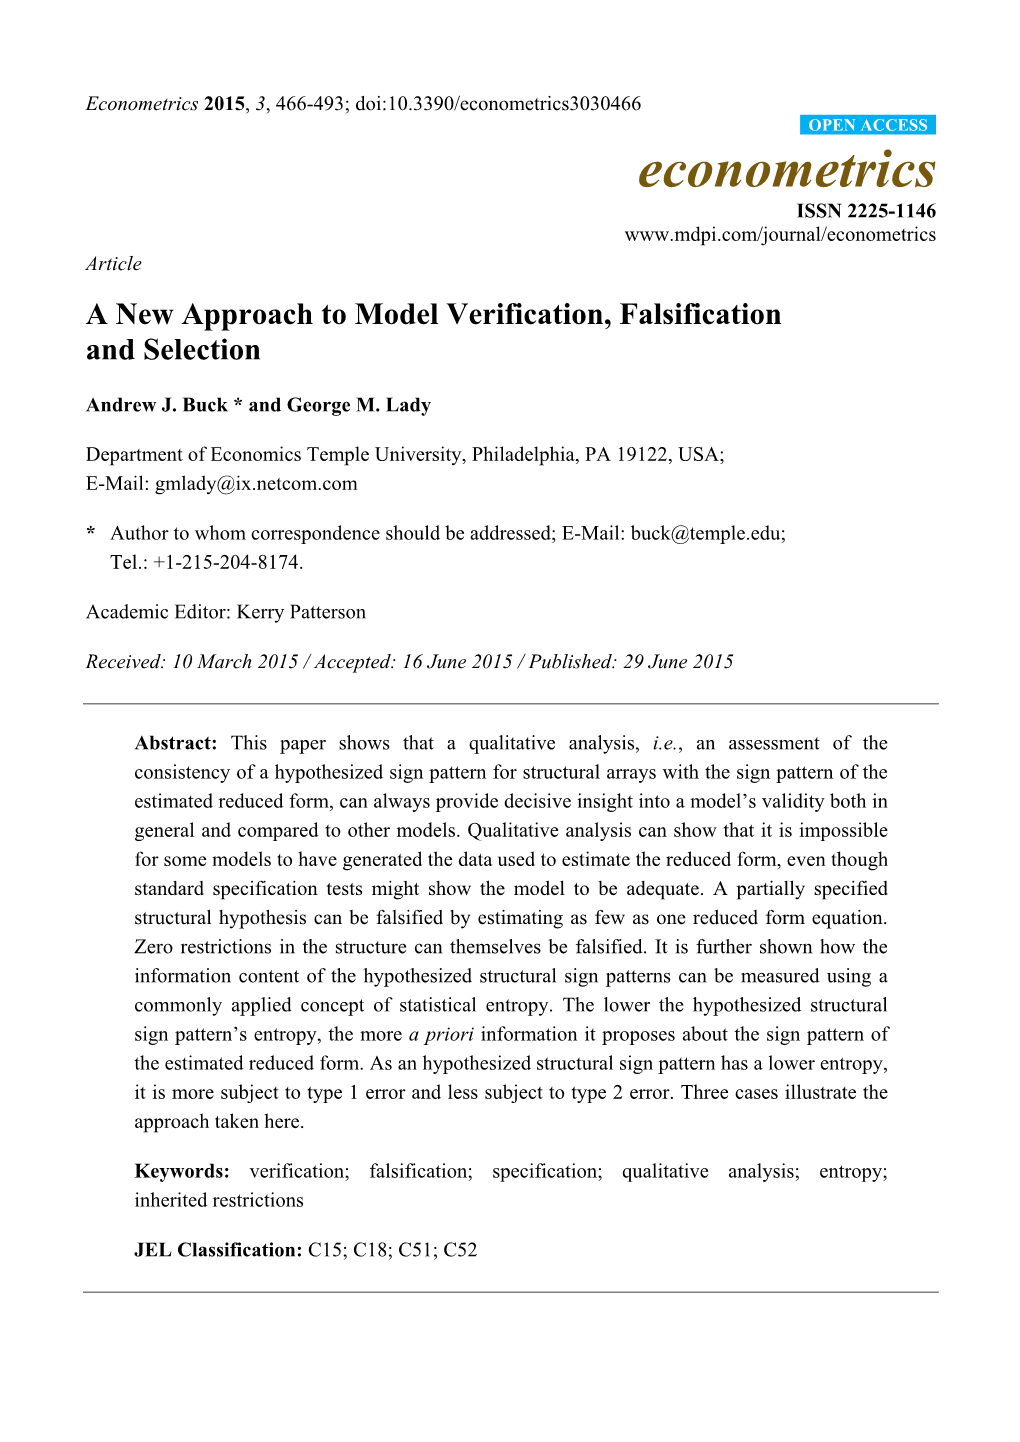 A New Approach to Model Verification, Falsification and Selection